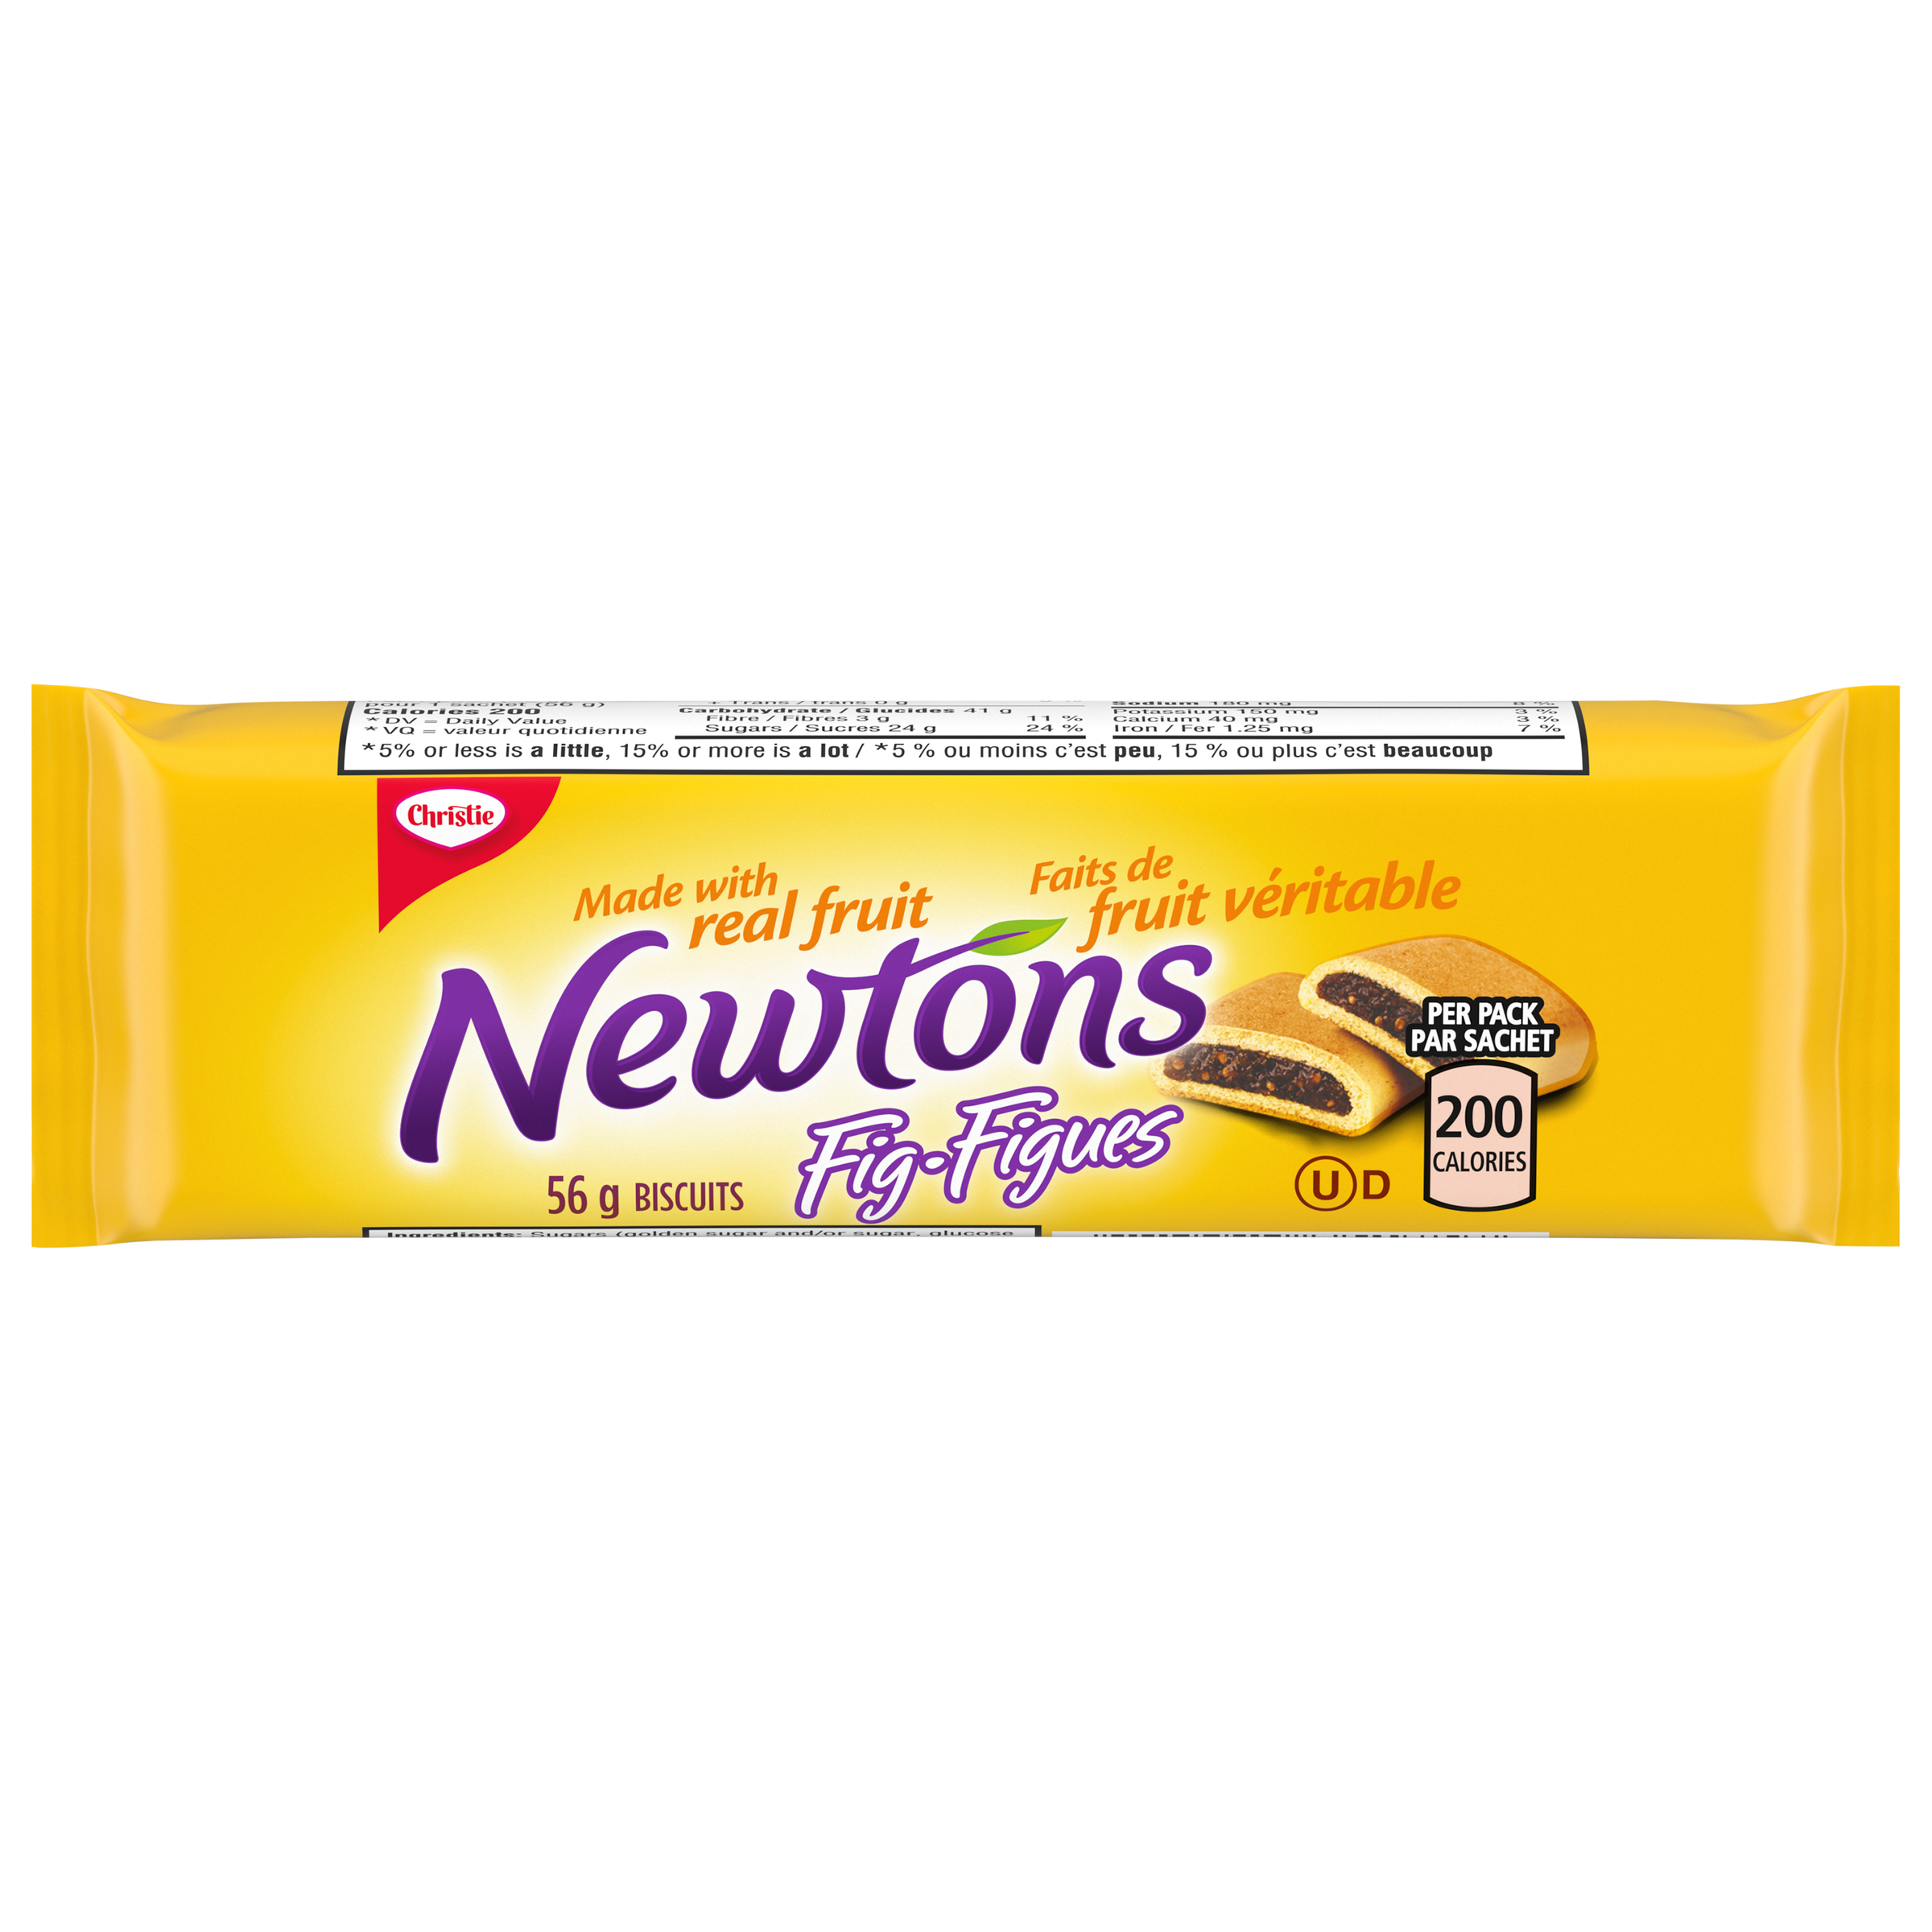 CHR NEWTONS FIGUES 56G